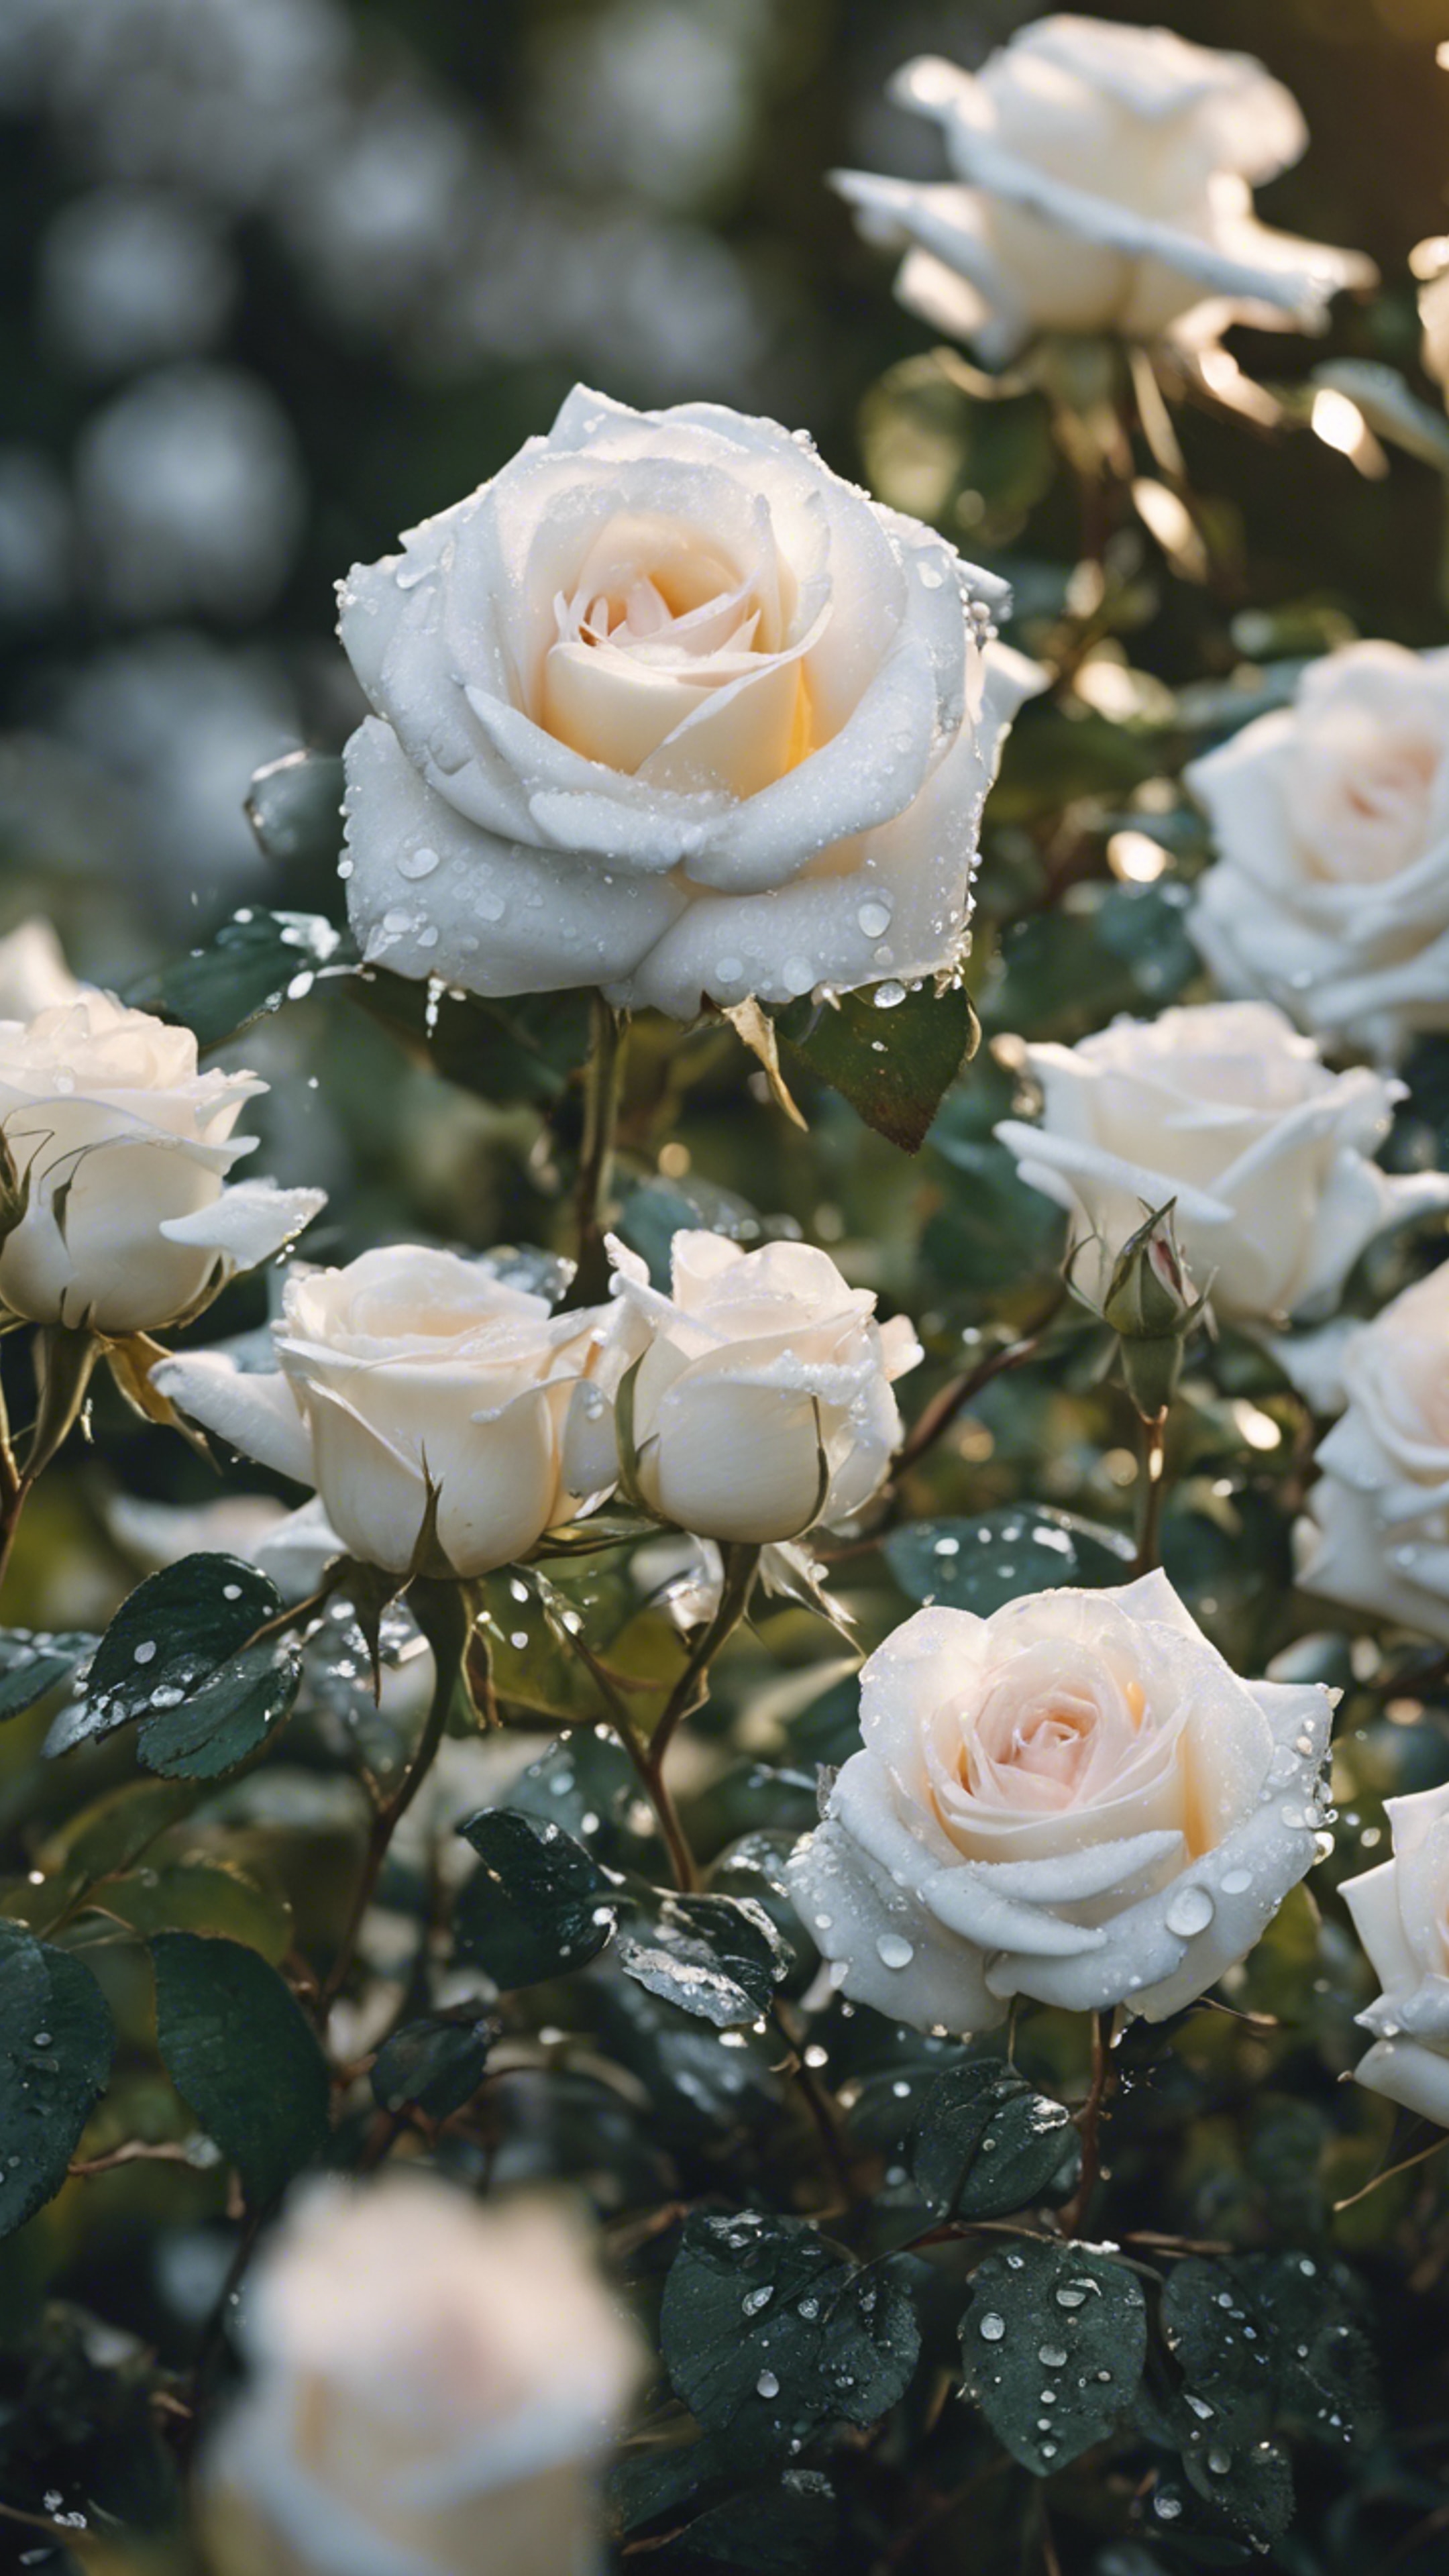 White roses covered in silver morning dew in a lush rose garden. Papel de parede[67c2c5bc62874412a2b6]